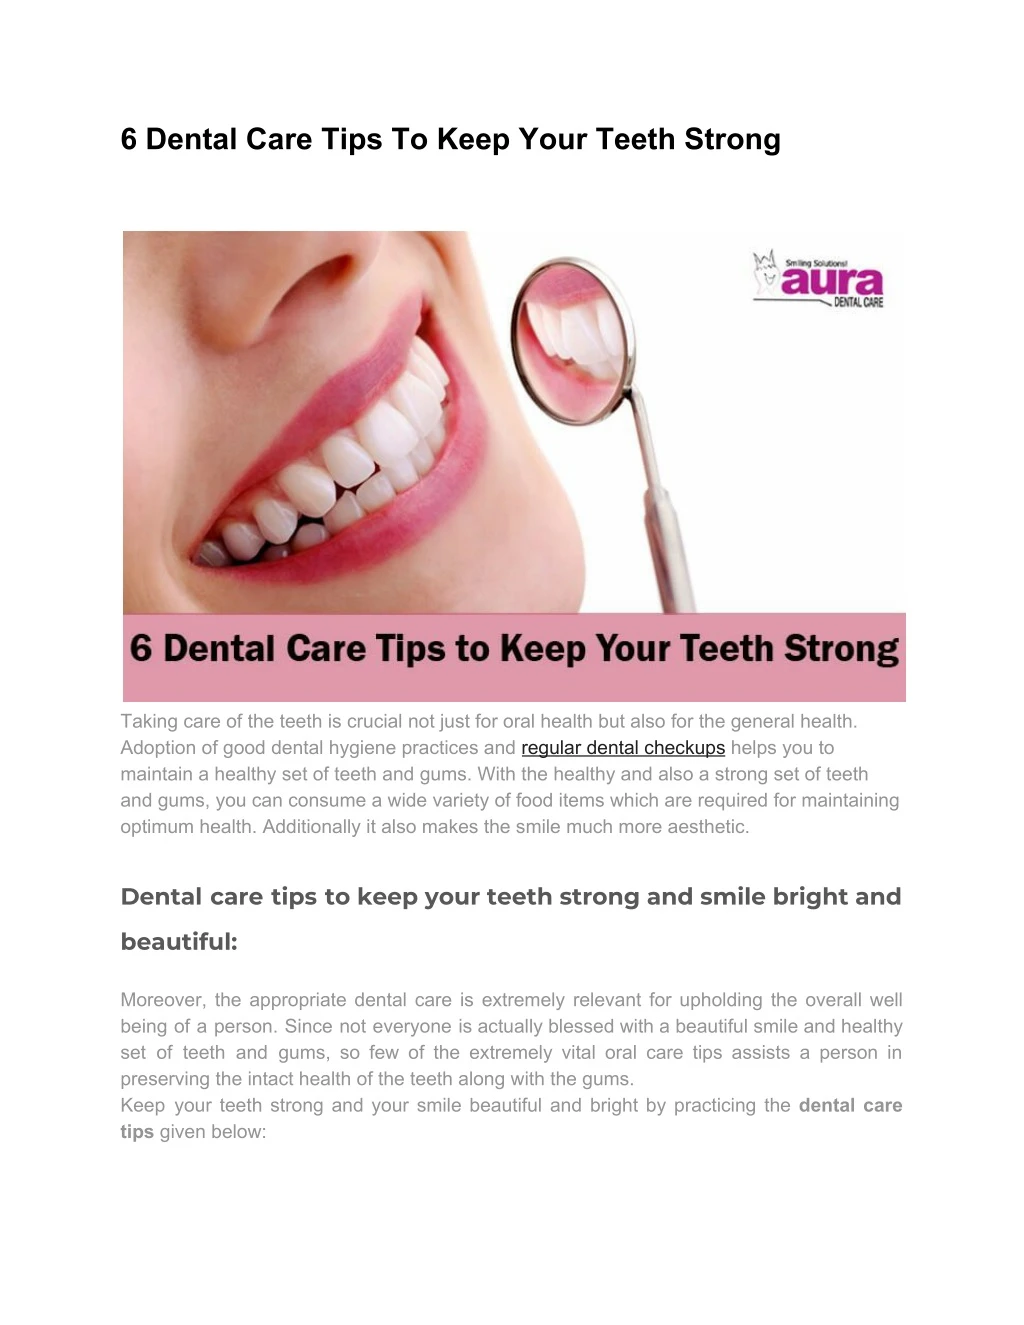 6 dental care tips to keep your teeth strong